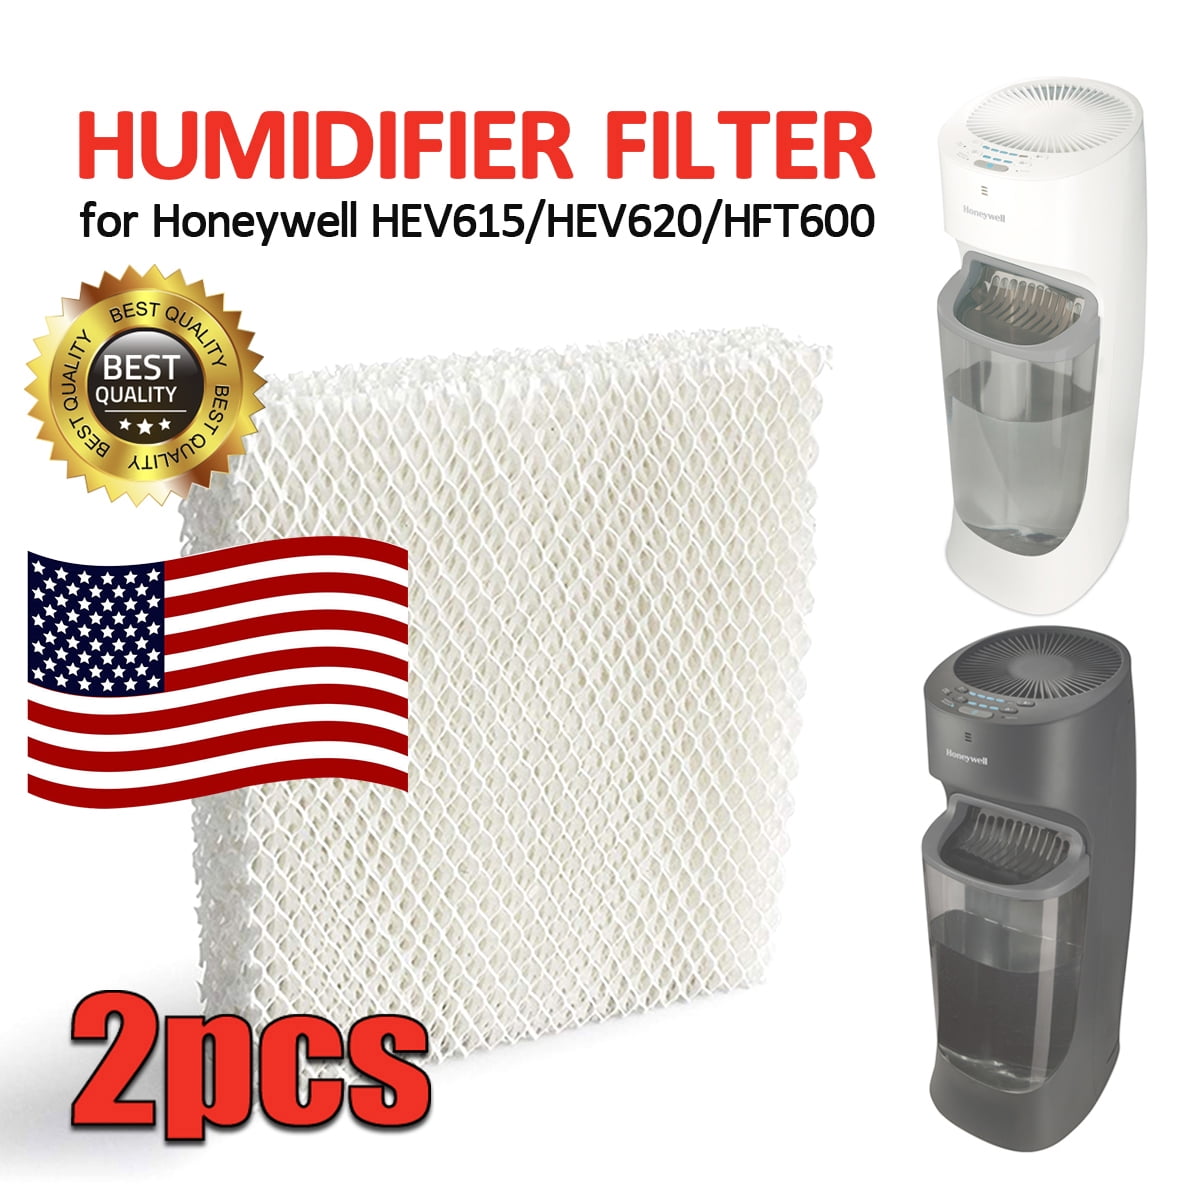 Compatible with Honeywell Top Fill Humidifier Hev615 and Hev620 & HFT600PDQ Compatible with Part # HFT600 JJSS 2 Pack HFT600 Humidifier Wicking Filter T HFT600T